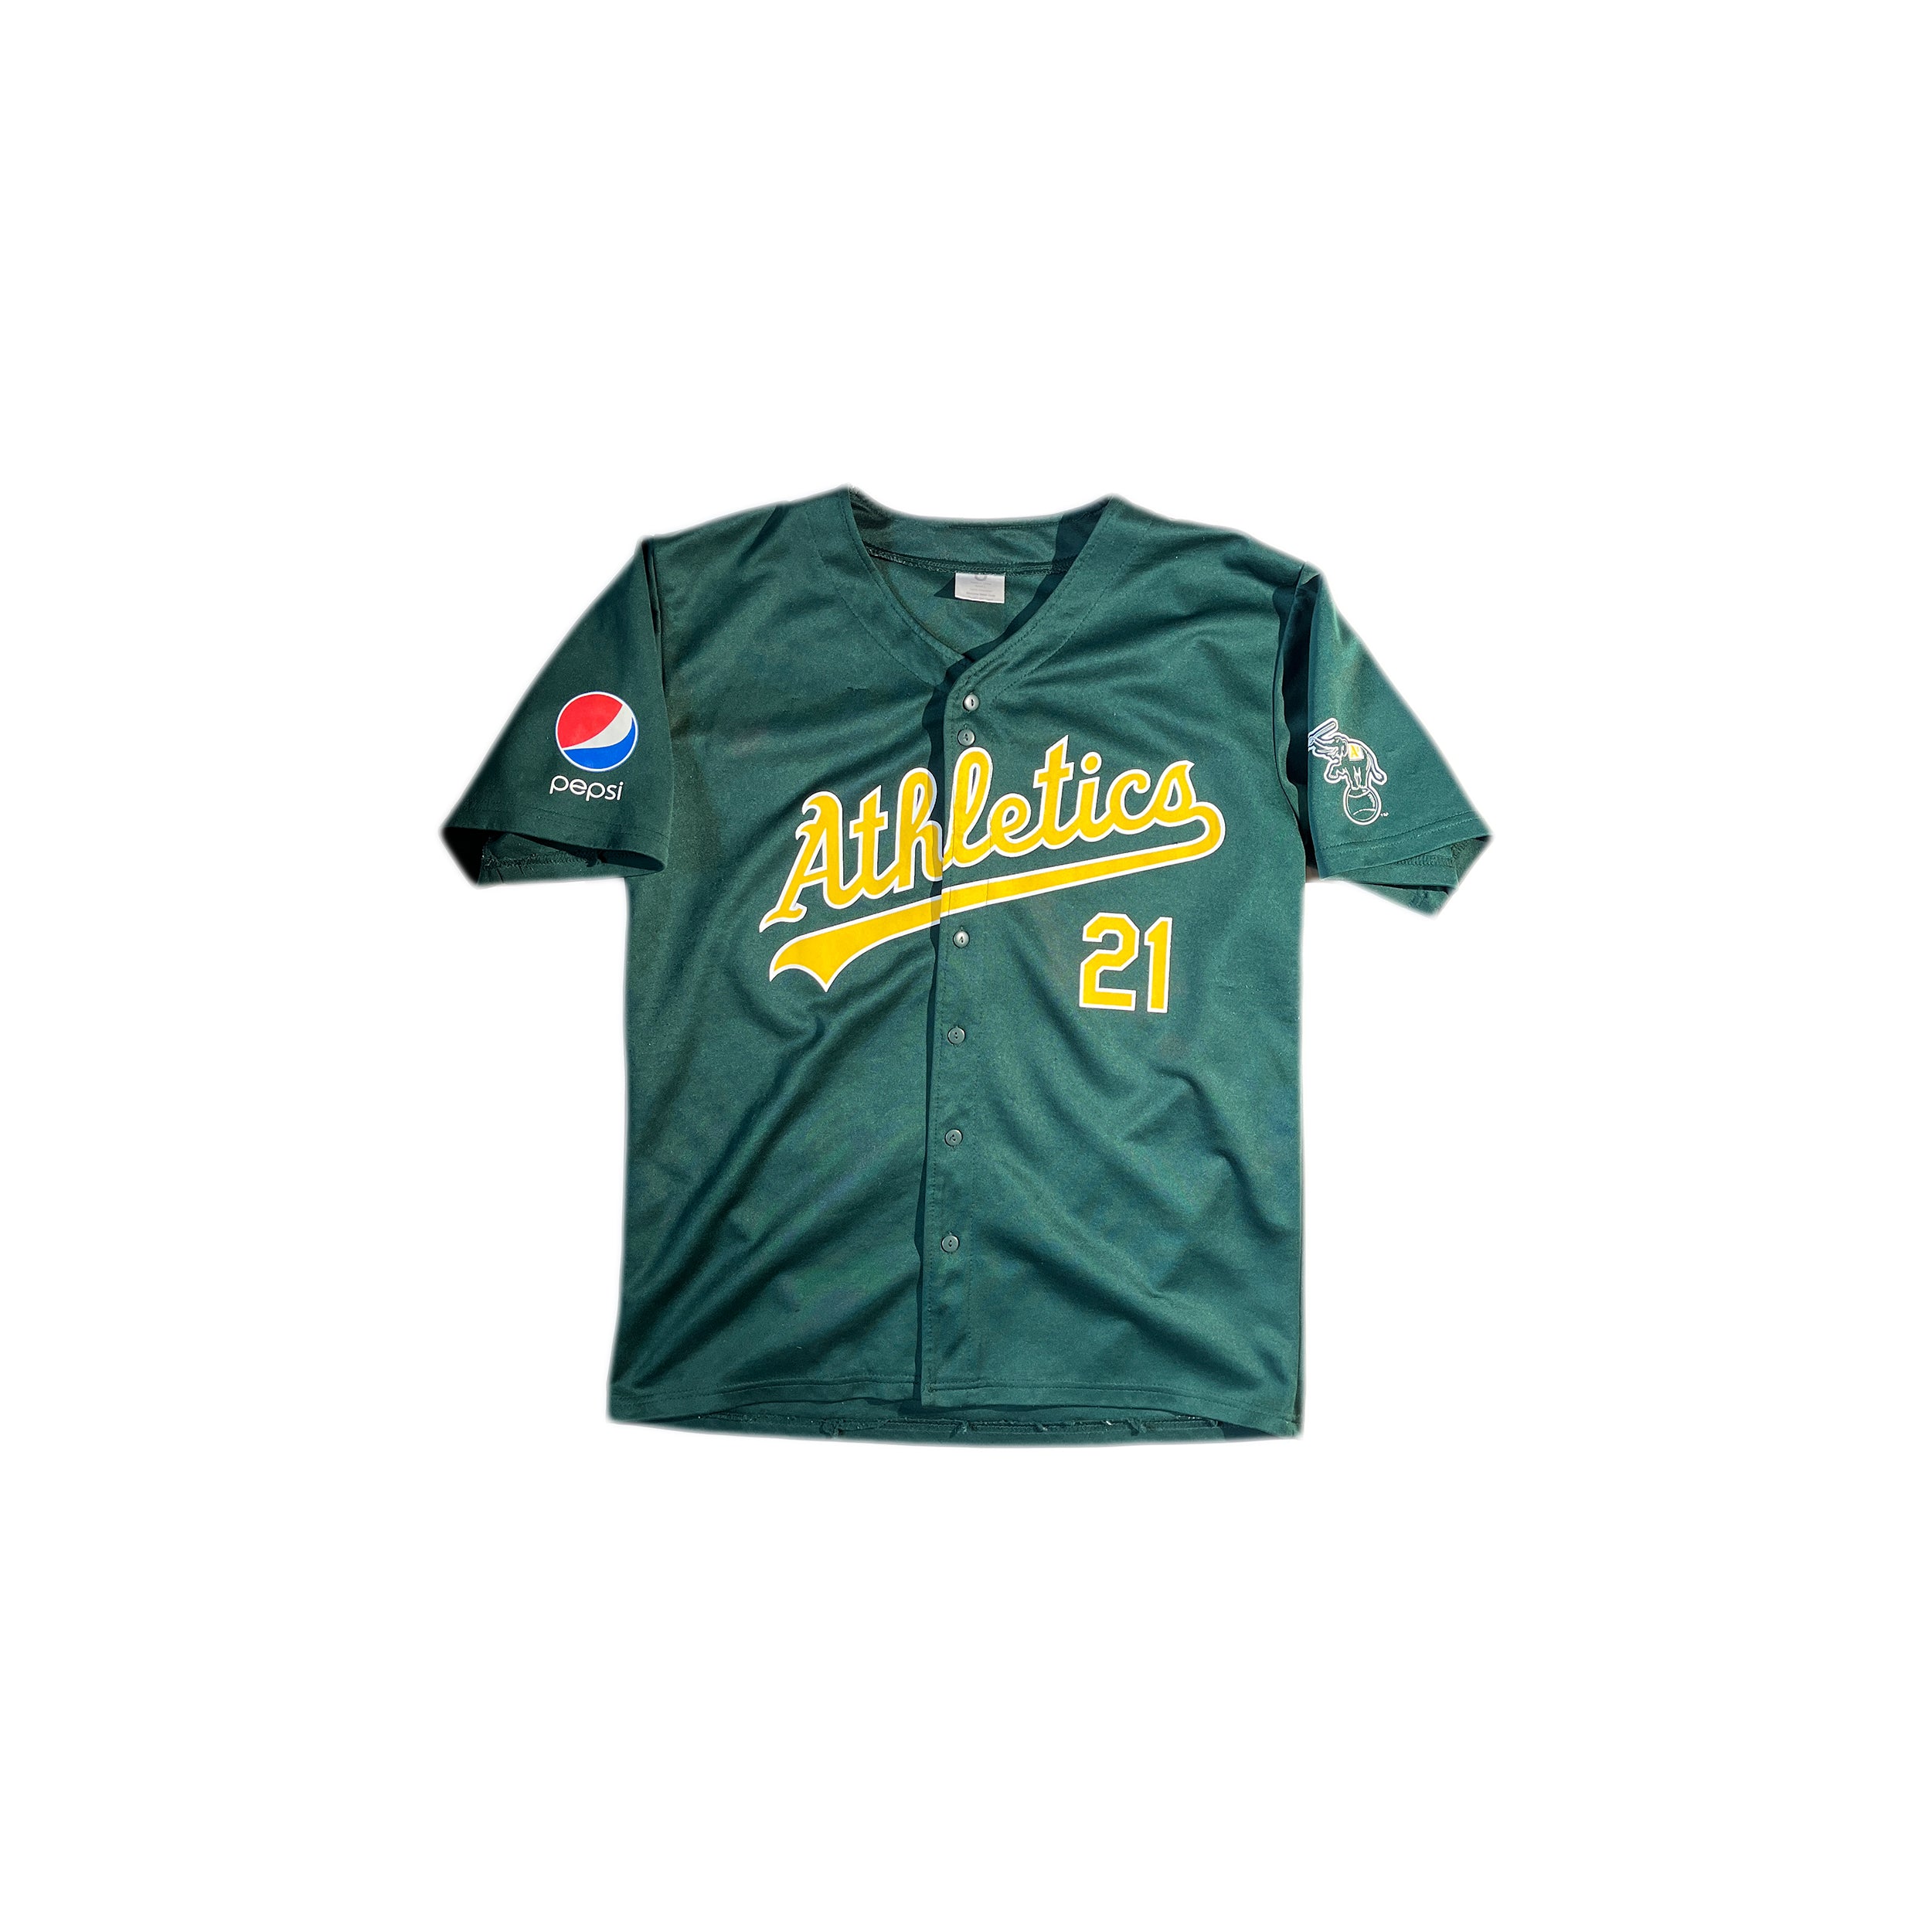 a's batting practice jersey